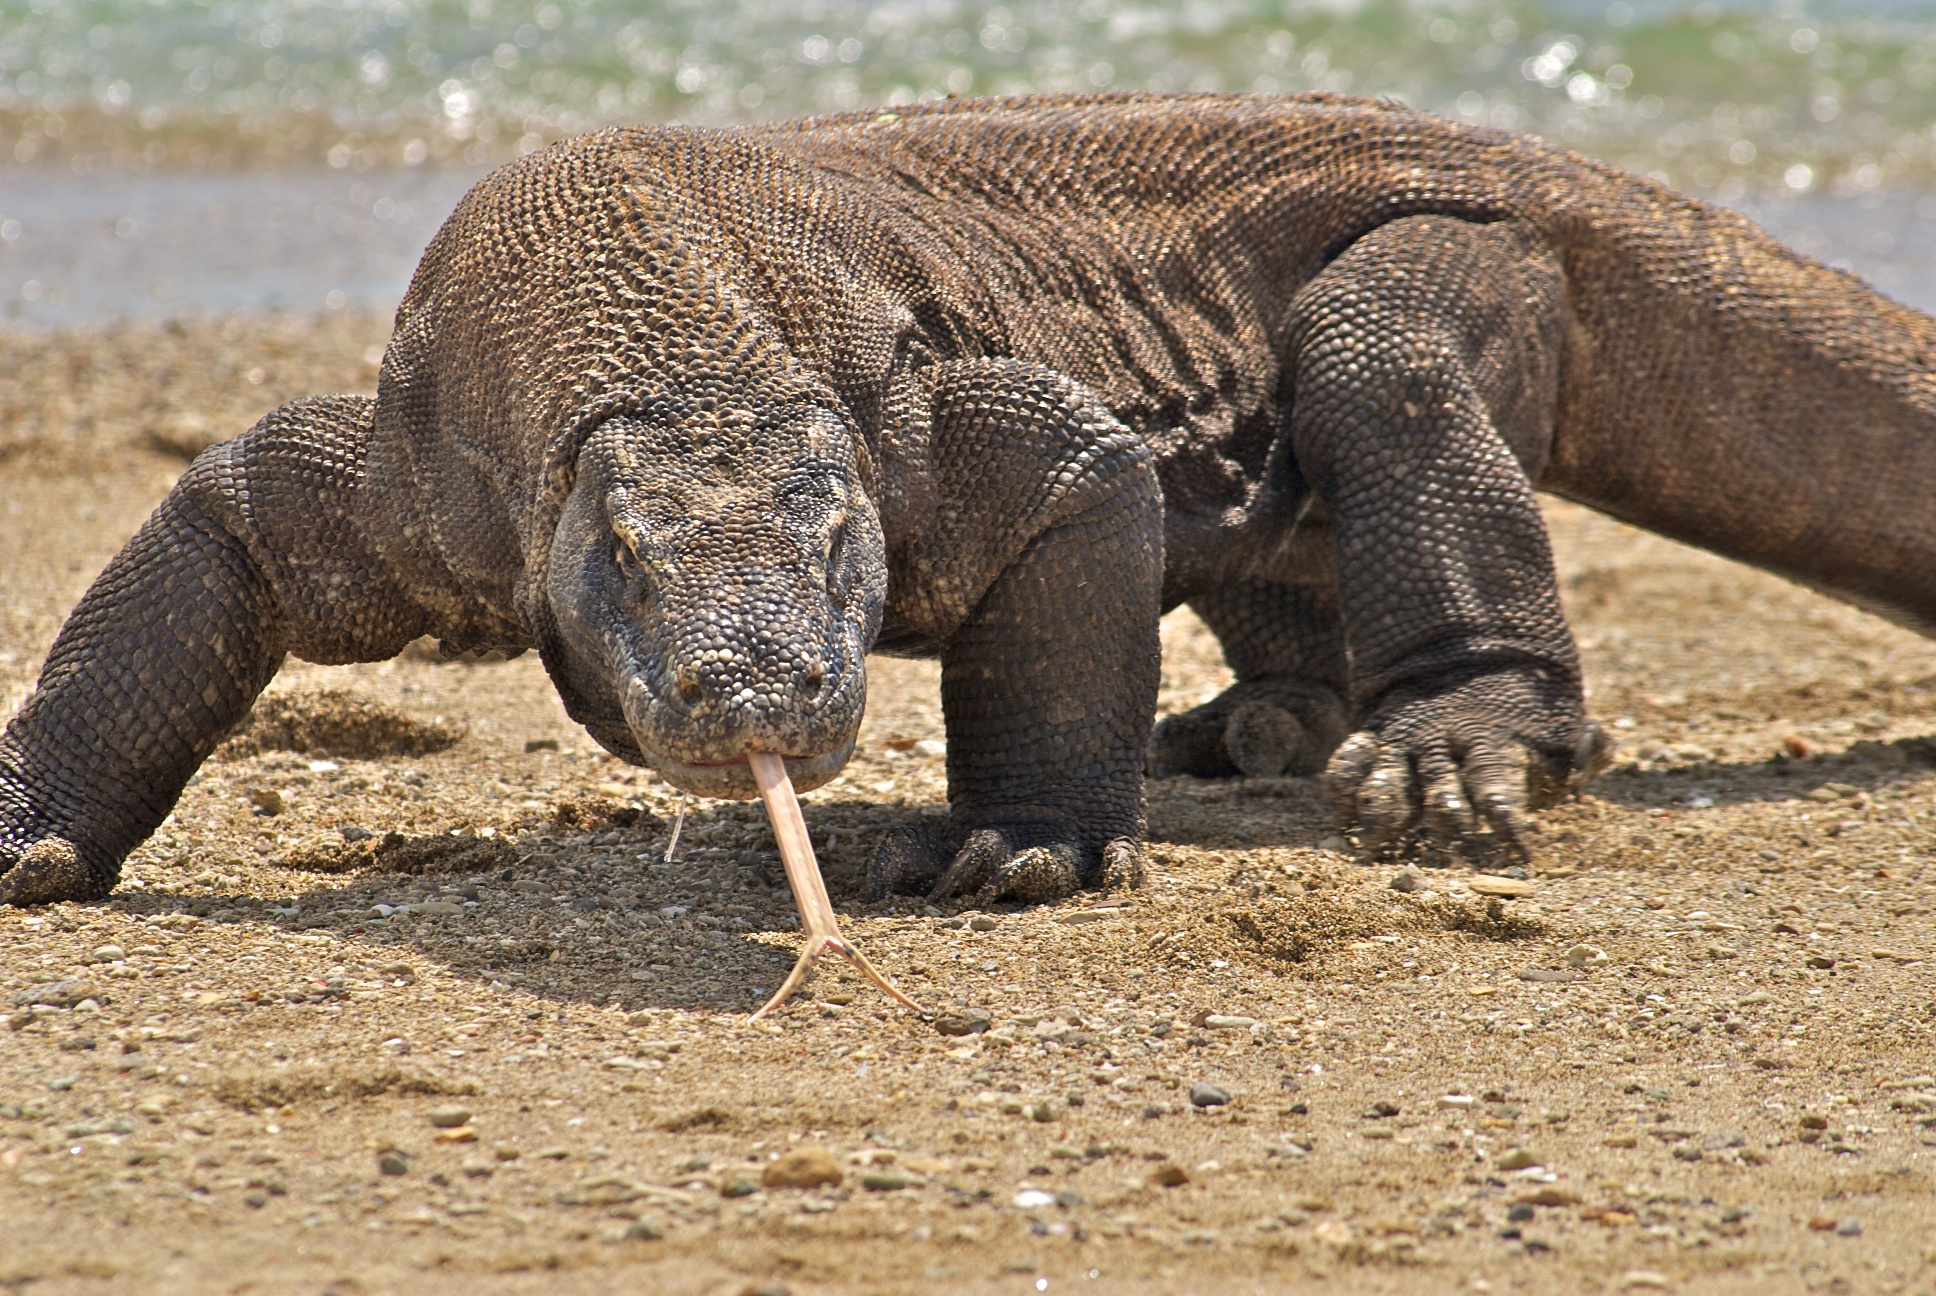 The Komodo Dragon Drinks By Sucking Water Into Its Mouth Via Buccal